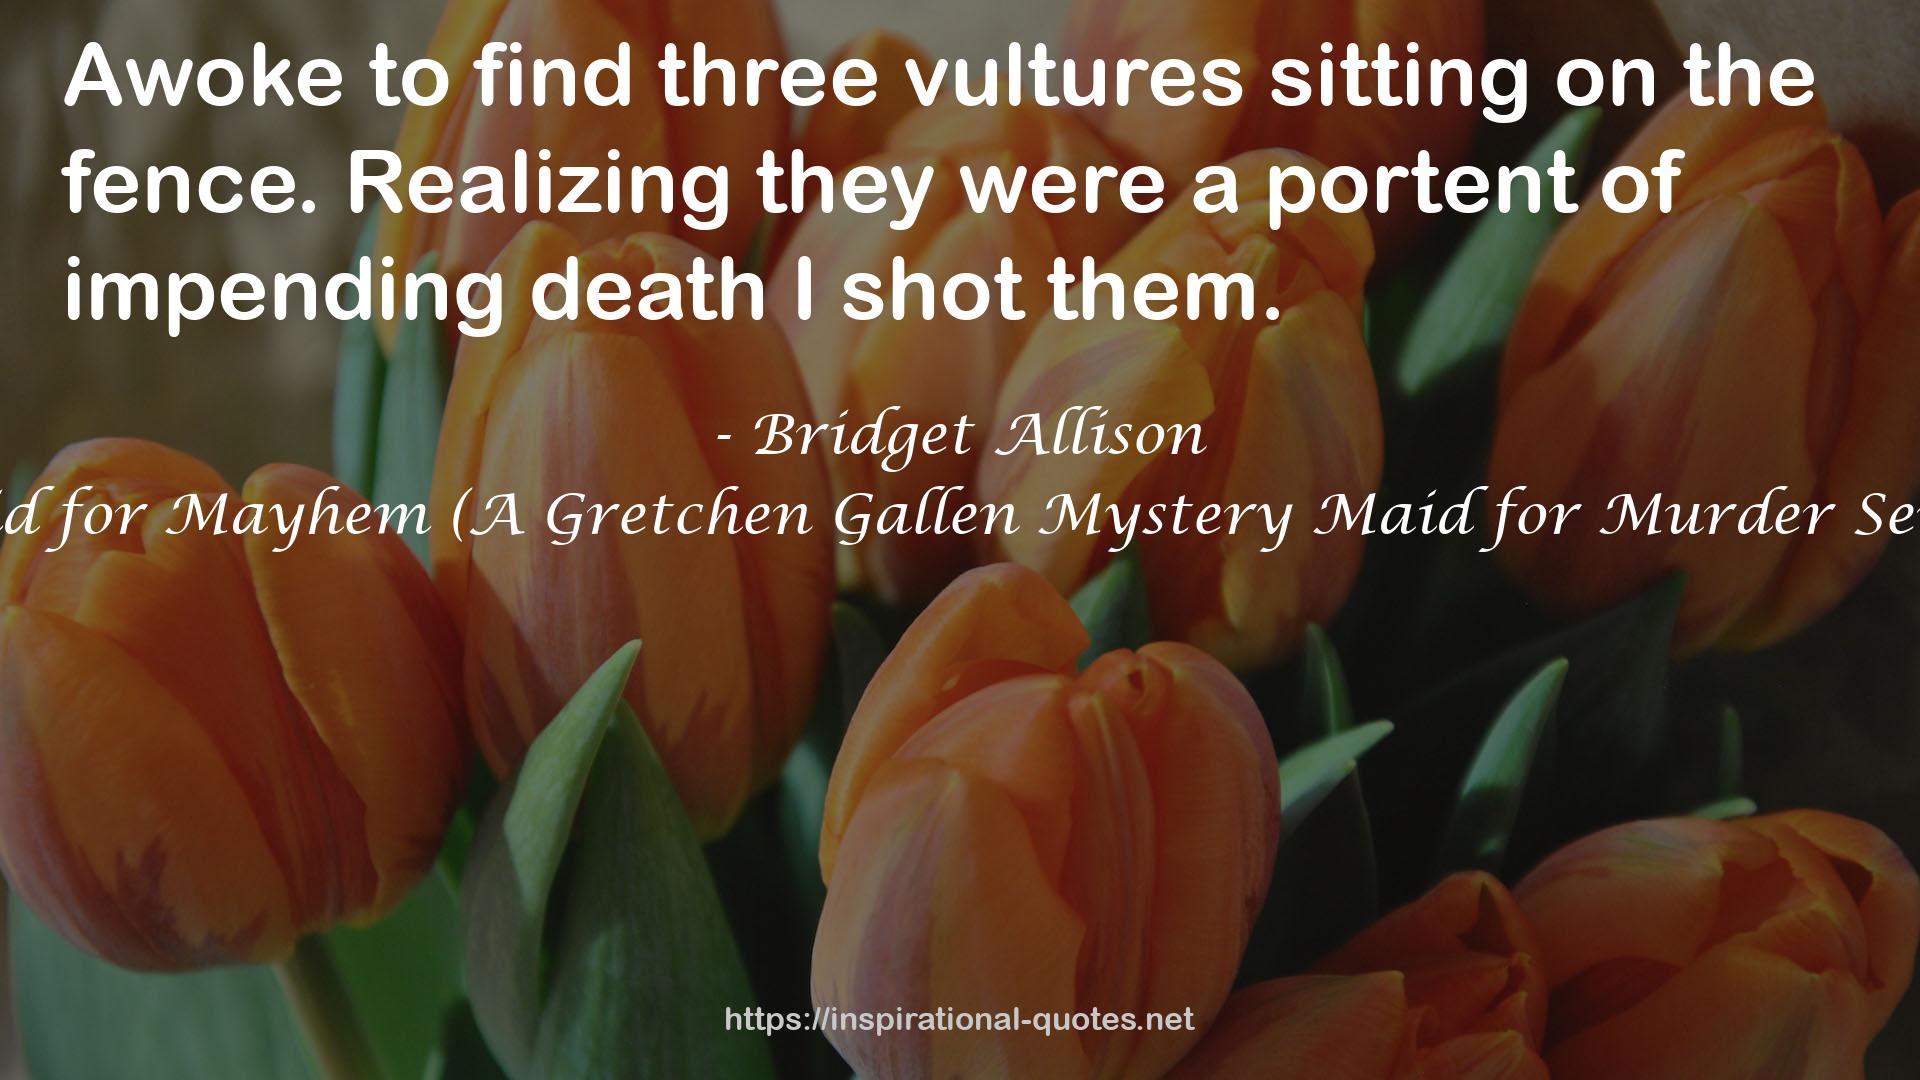 Maid for Mayhem (A Gretchen Gallen Mystery Maid for Murder Series) QUOTES